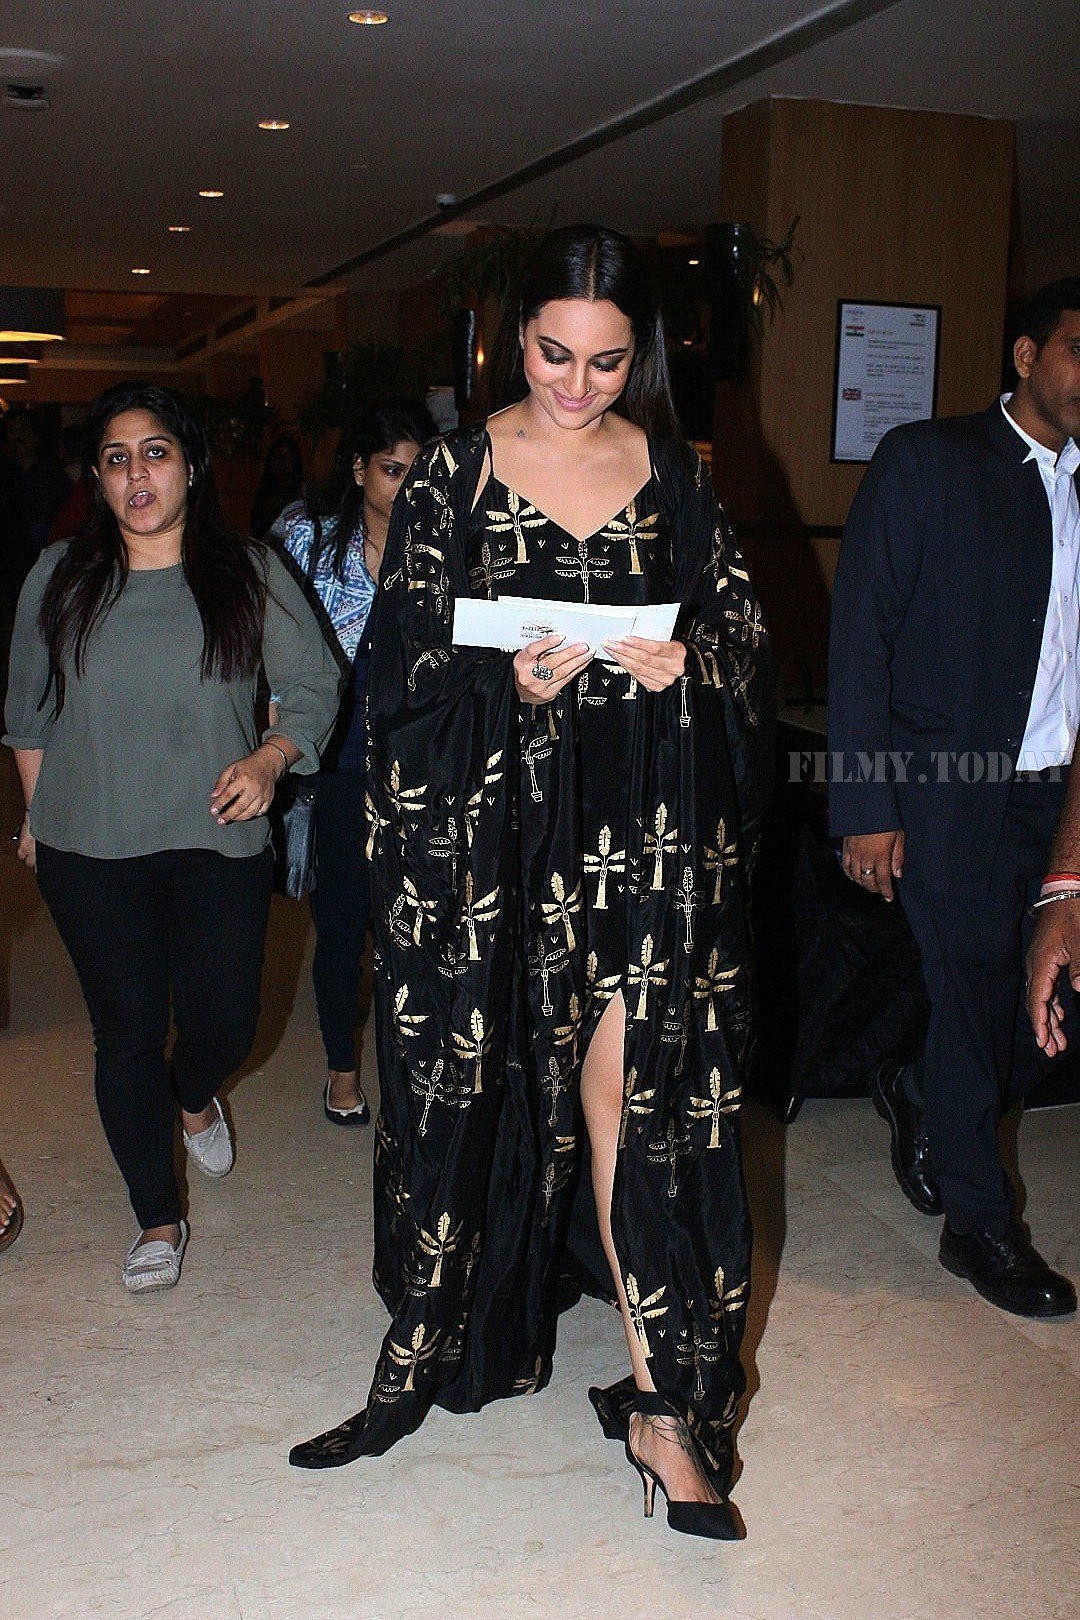 Sonakshi Sinha - Photos: The Awards Night For Its Short Film Festival Based On Women's Safety & Empowerment | Picture 1549841